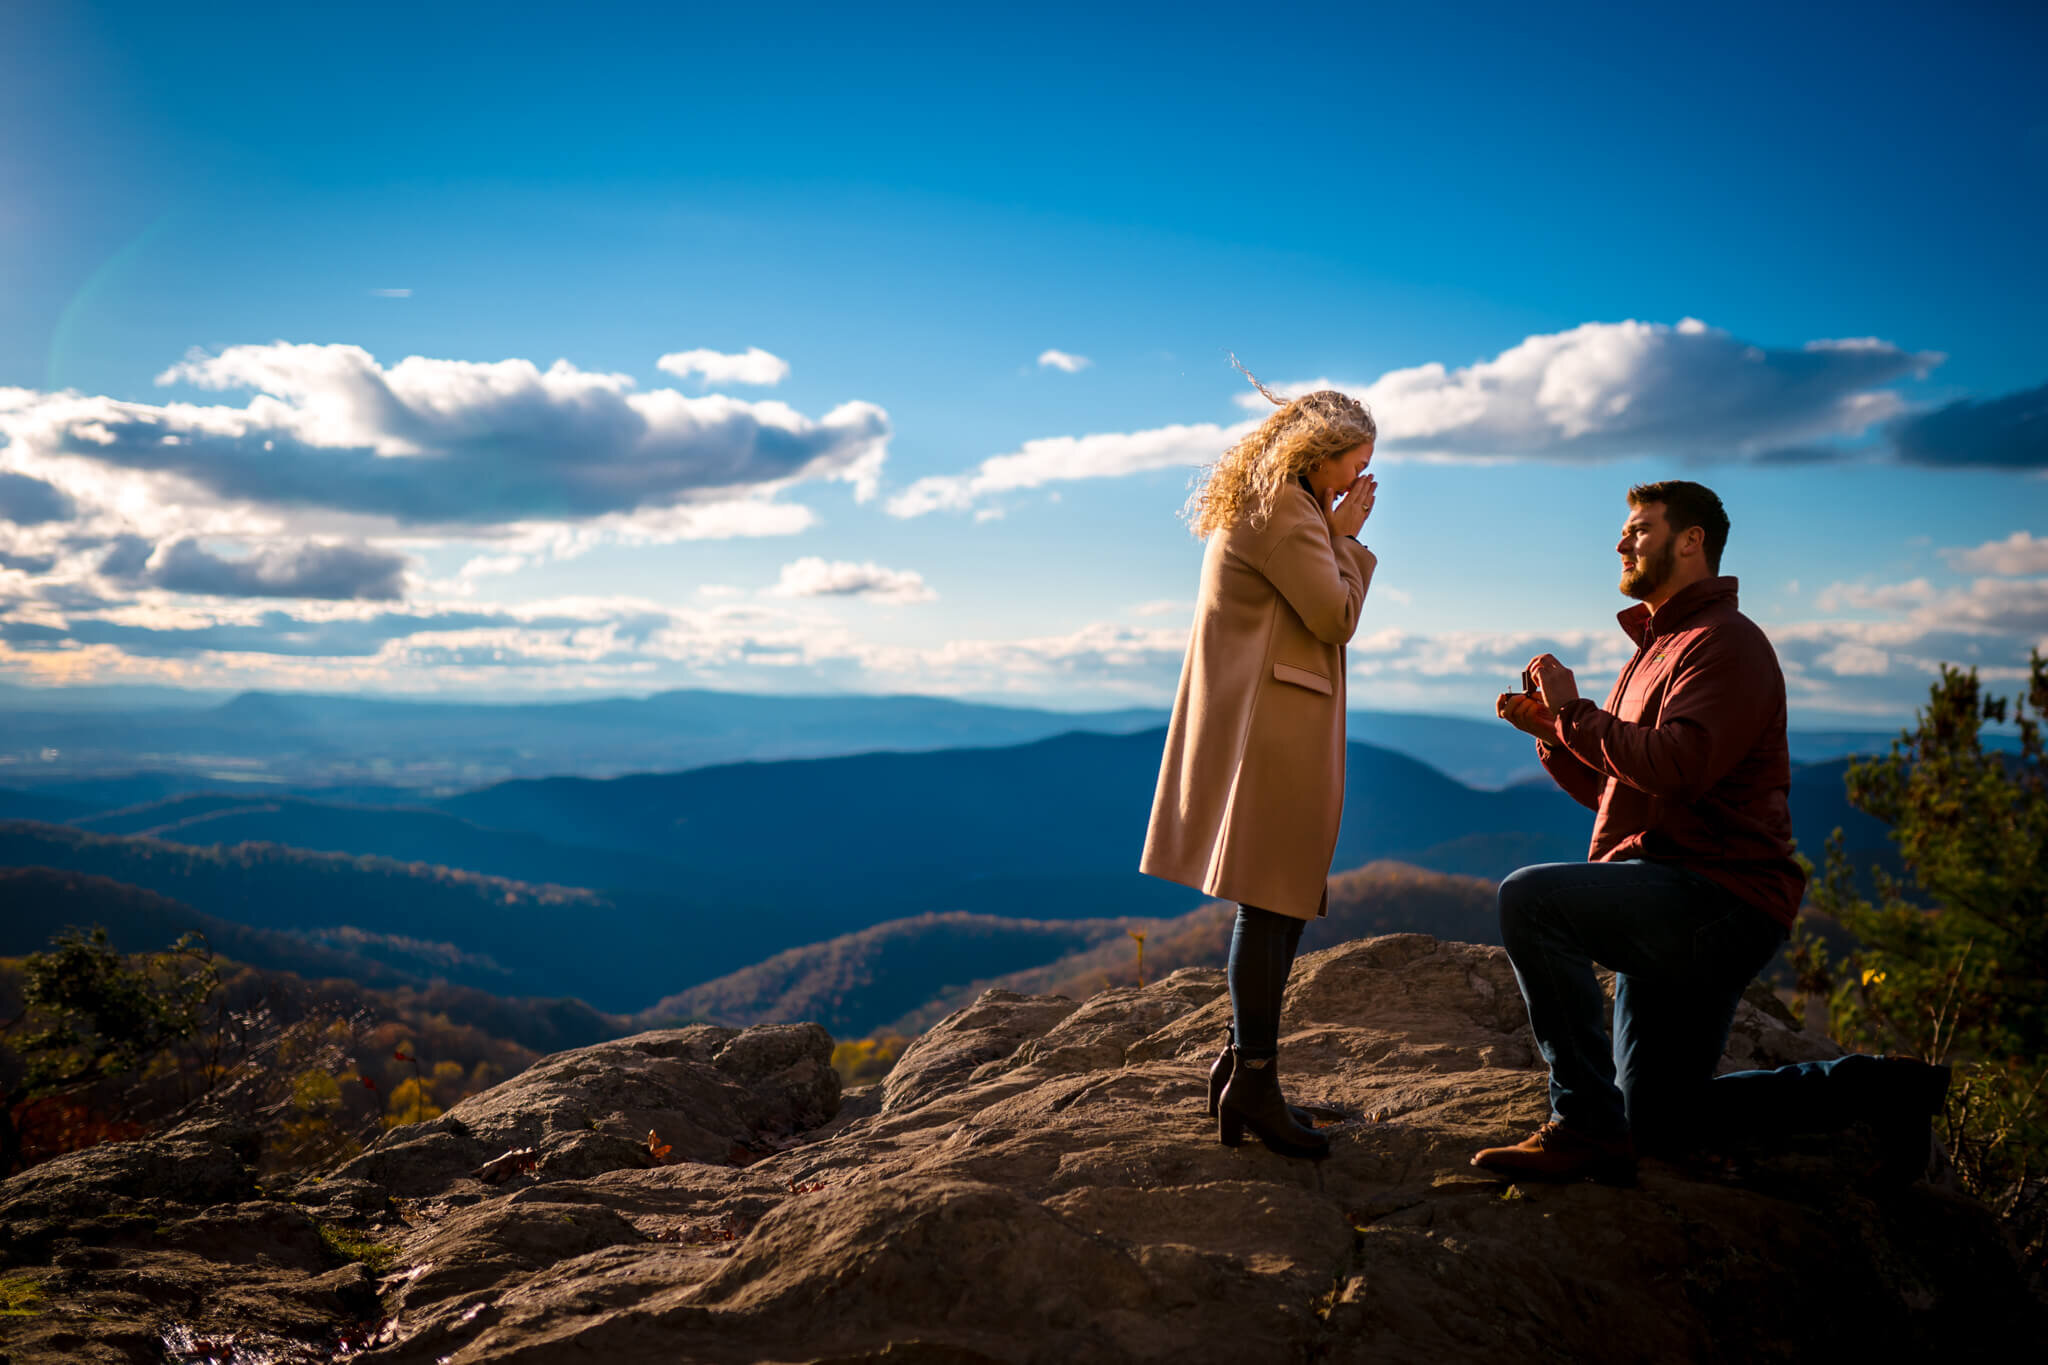 Surprise-Proposal-The-Point-Overlook-Shenandoah-National-Park-Photography-by-Bee-Two-Sweet-12.jpg